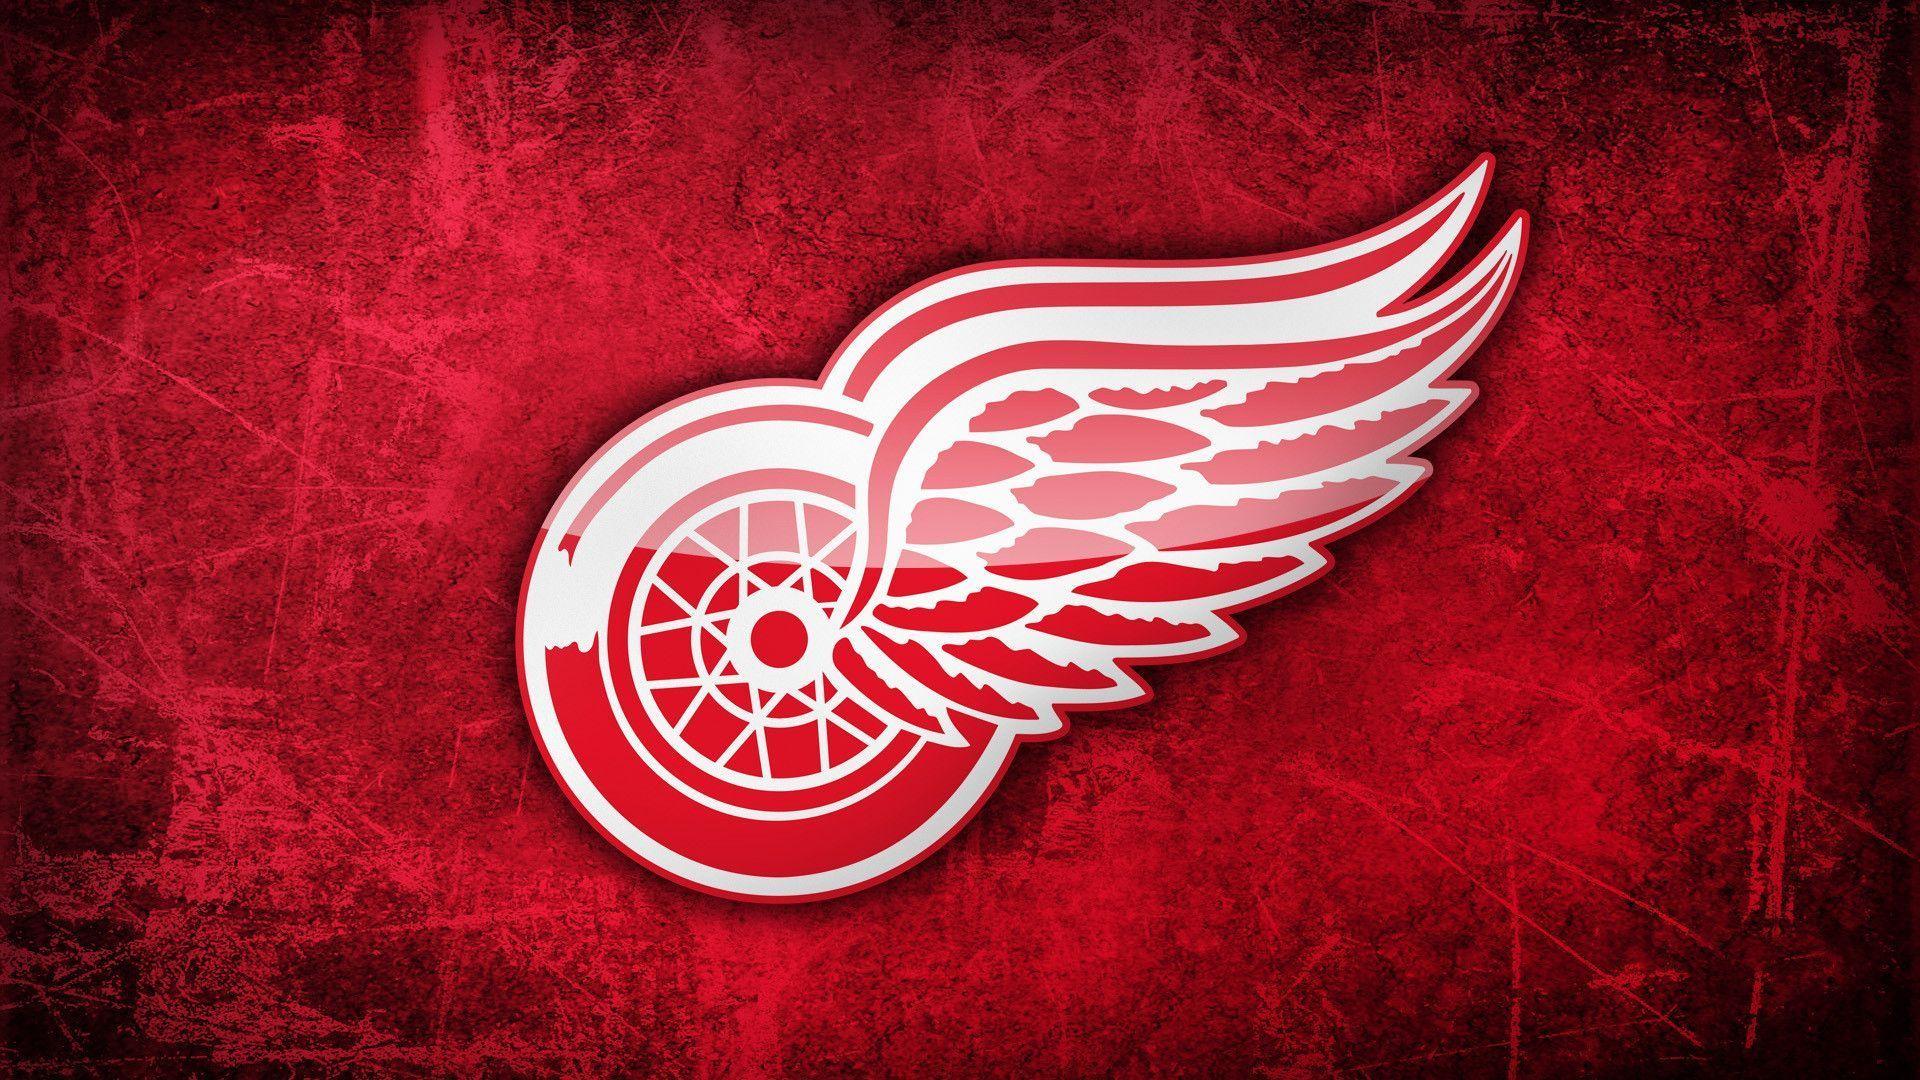 Detroit Red Wings on X: Wednesdays are for wallpapers